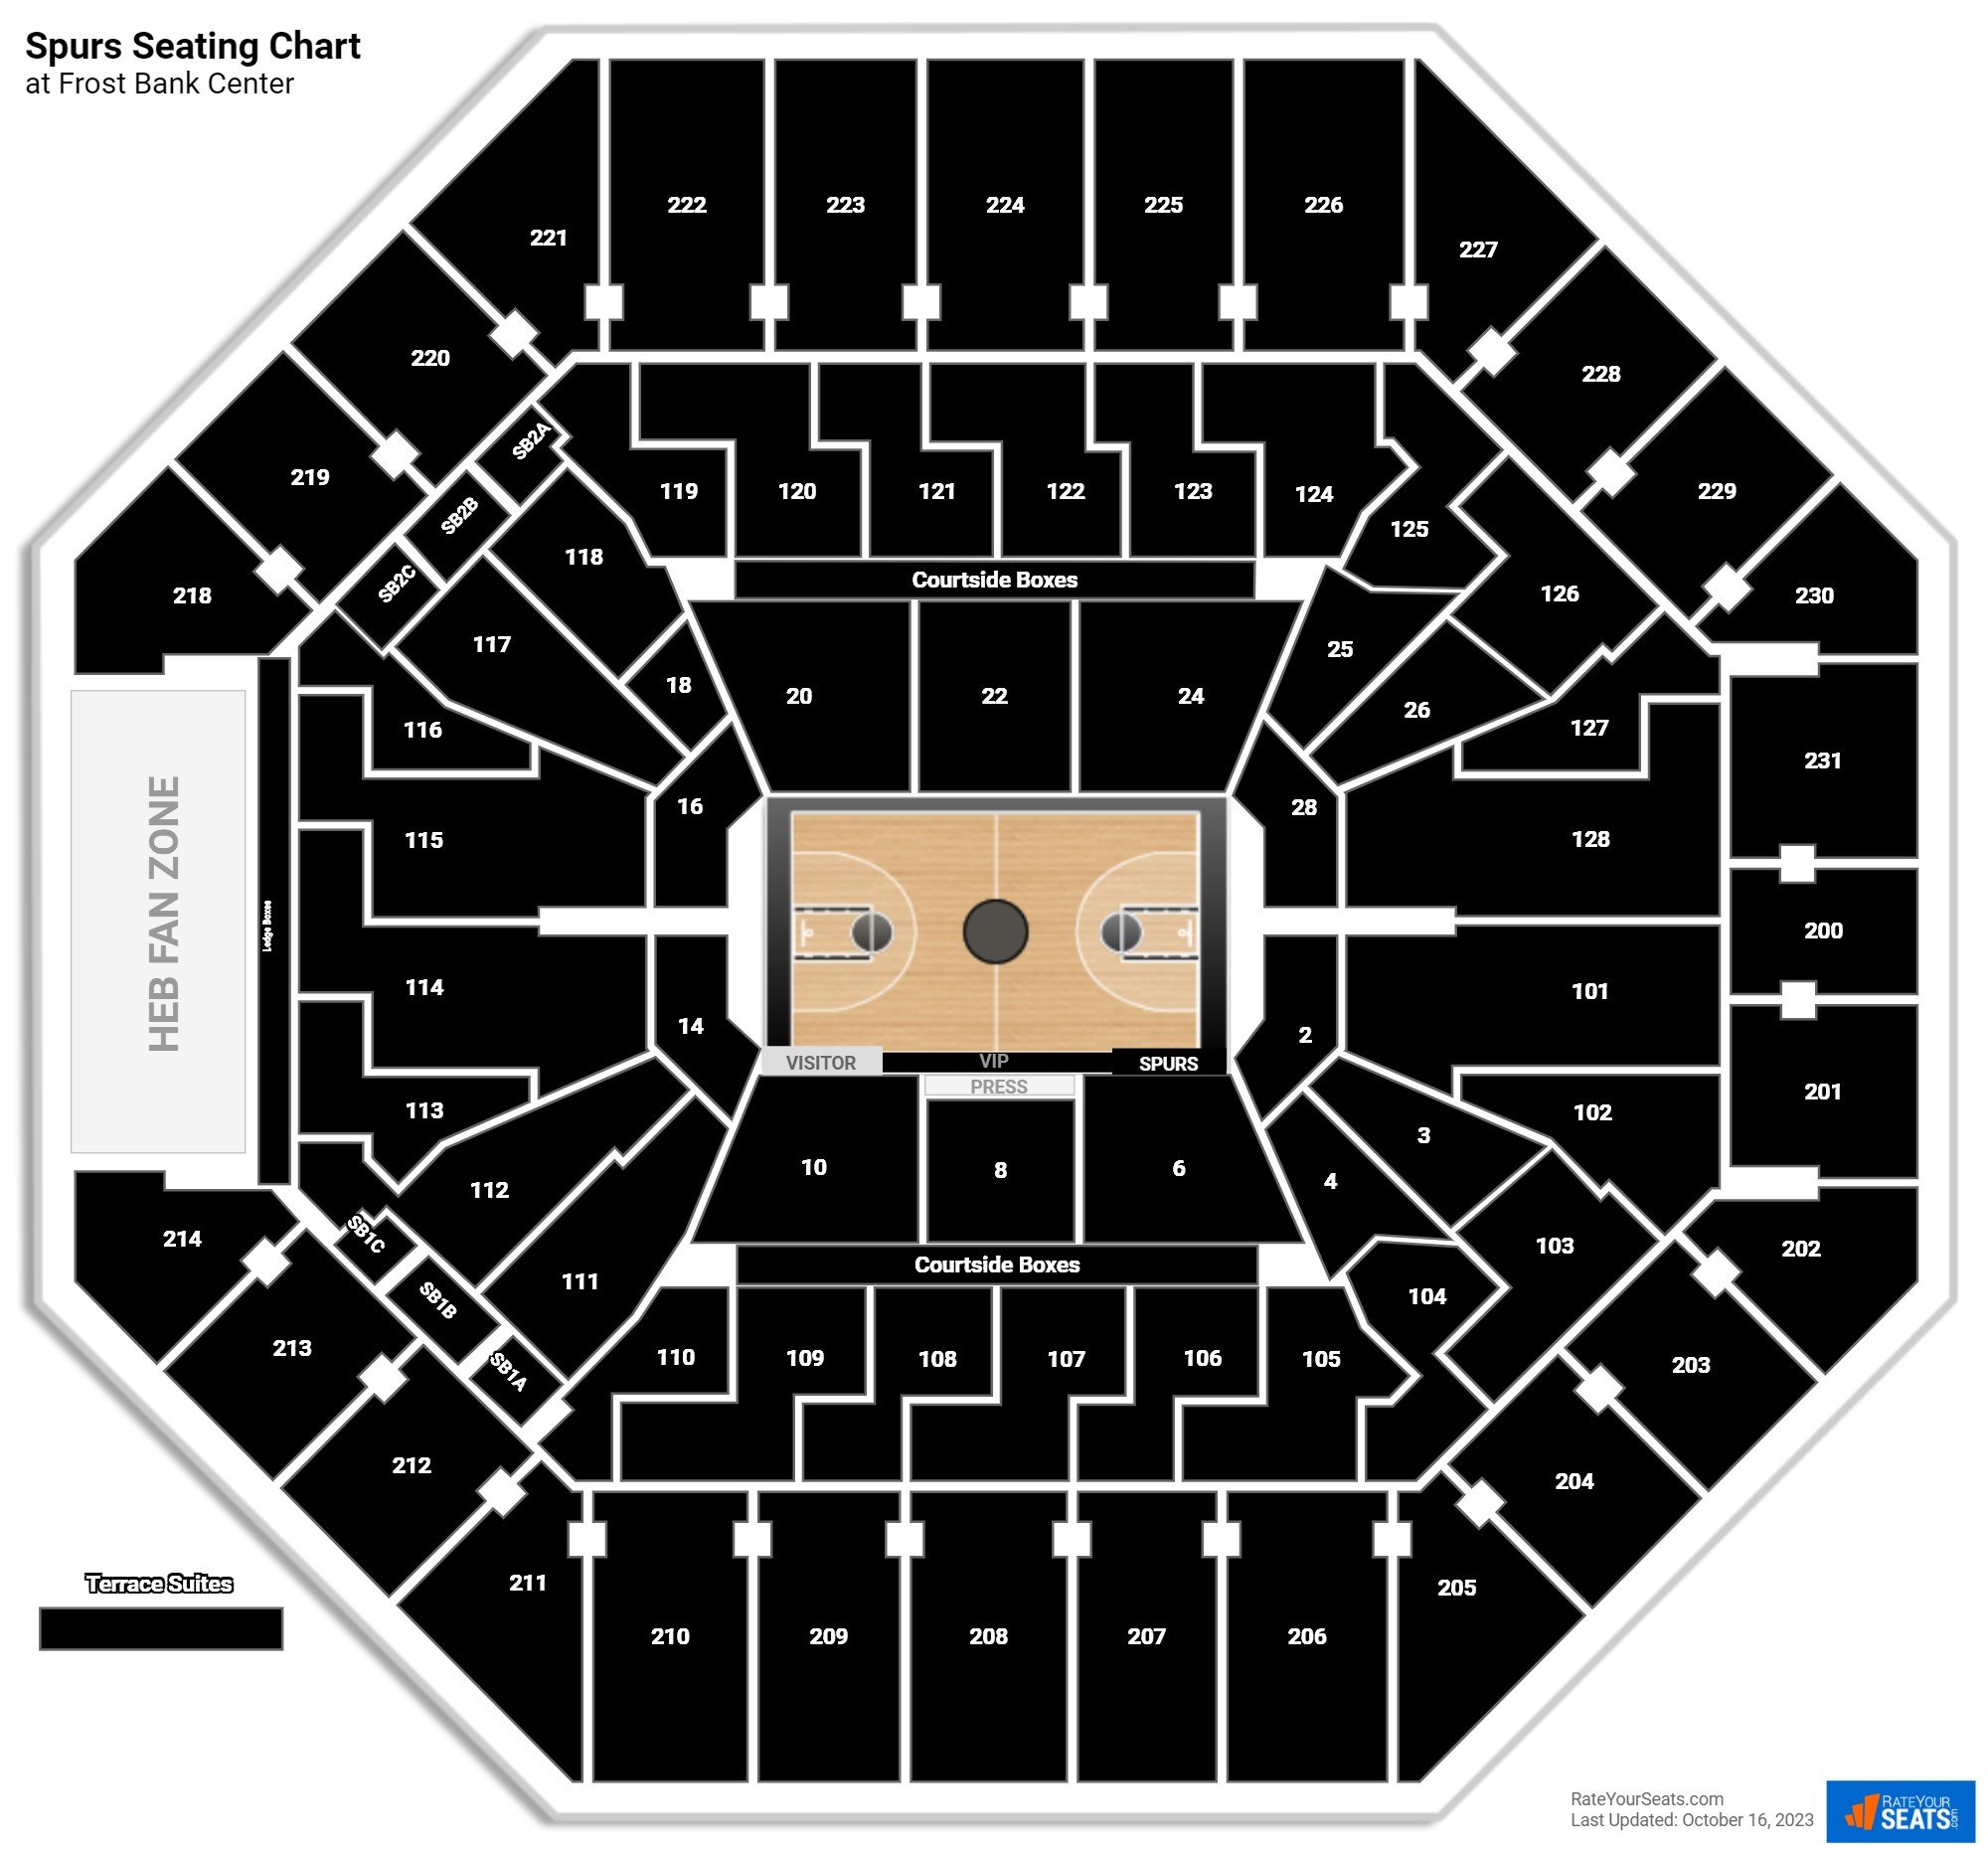 Frost Bank Center Seating Charts - RateYourSeats.com